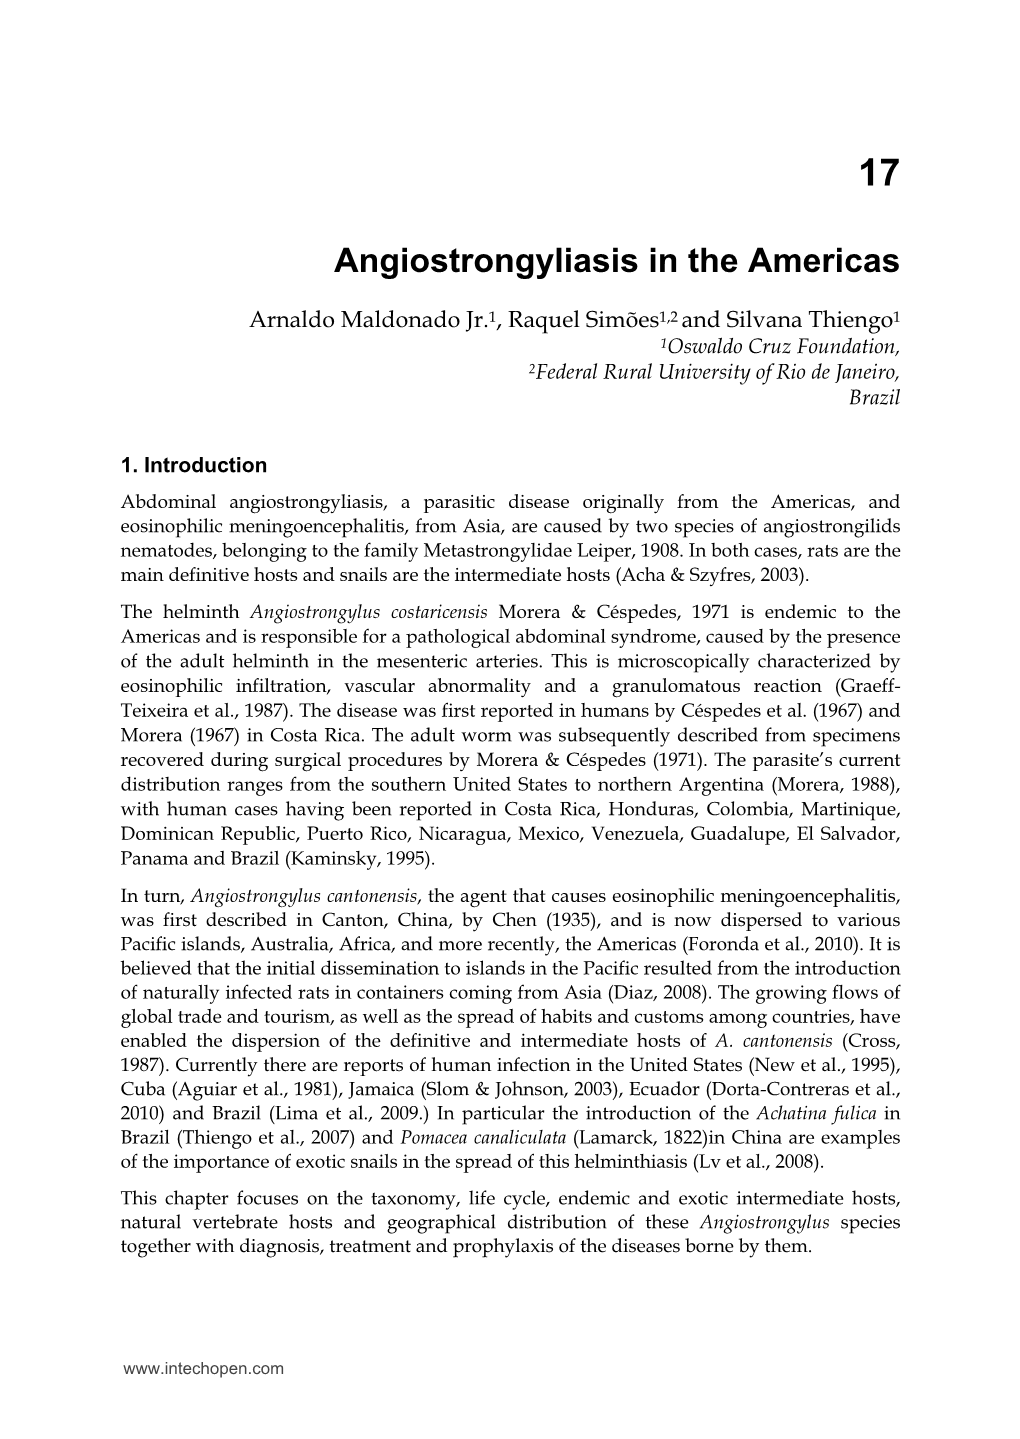 Angiostrongyliasis in the Americas